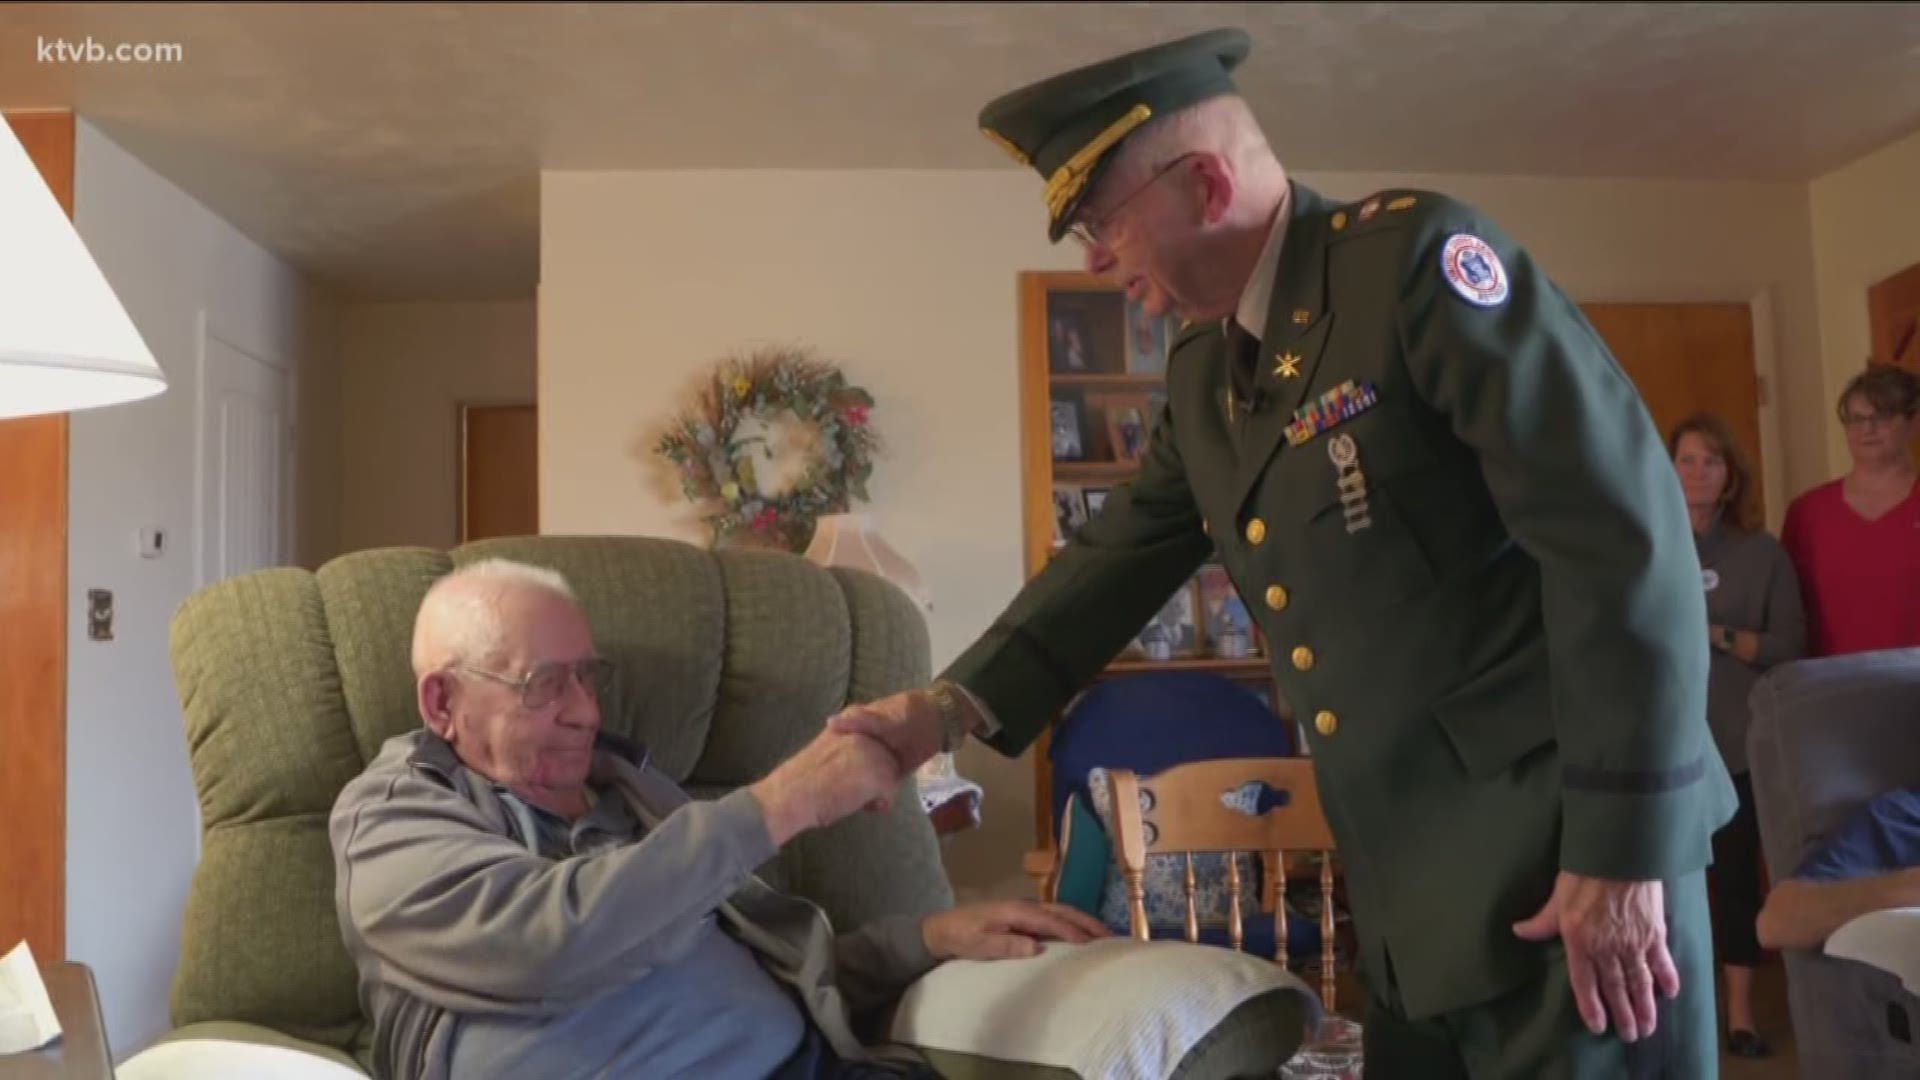 Nearly 300 World War II veterans pass away each day. That's why one Idaho veteran believes it's never too late to say, "thank you."